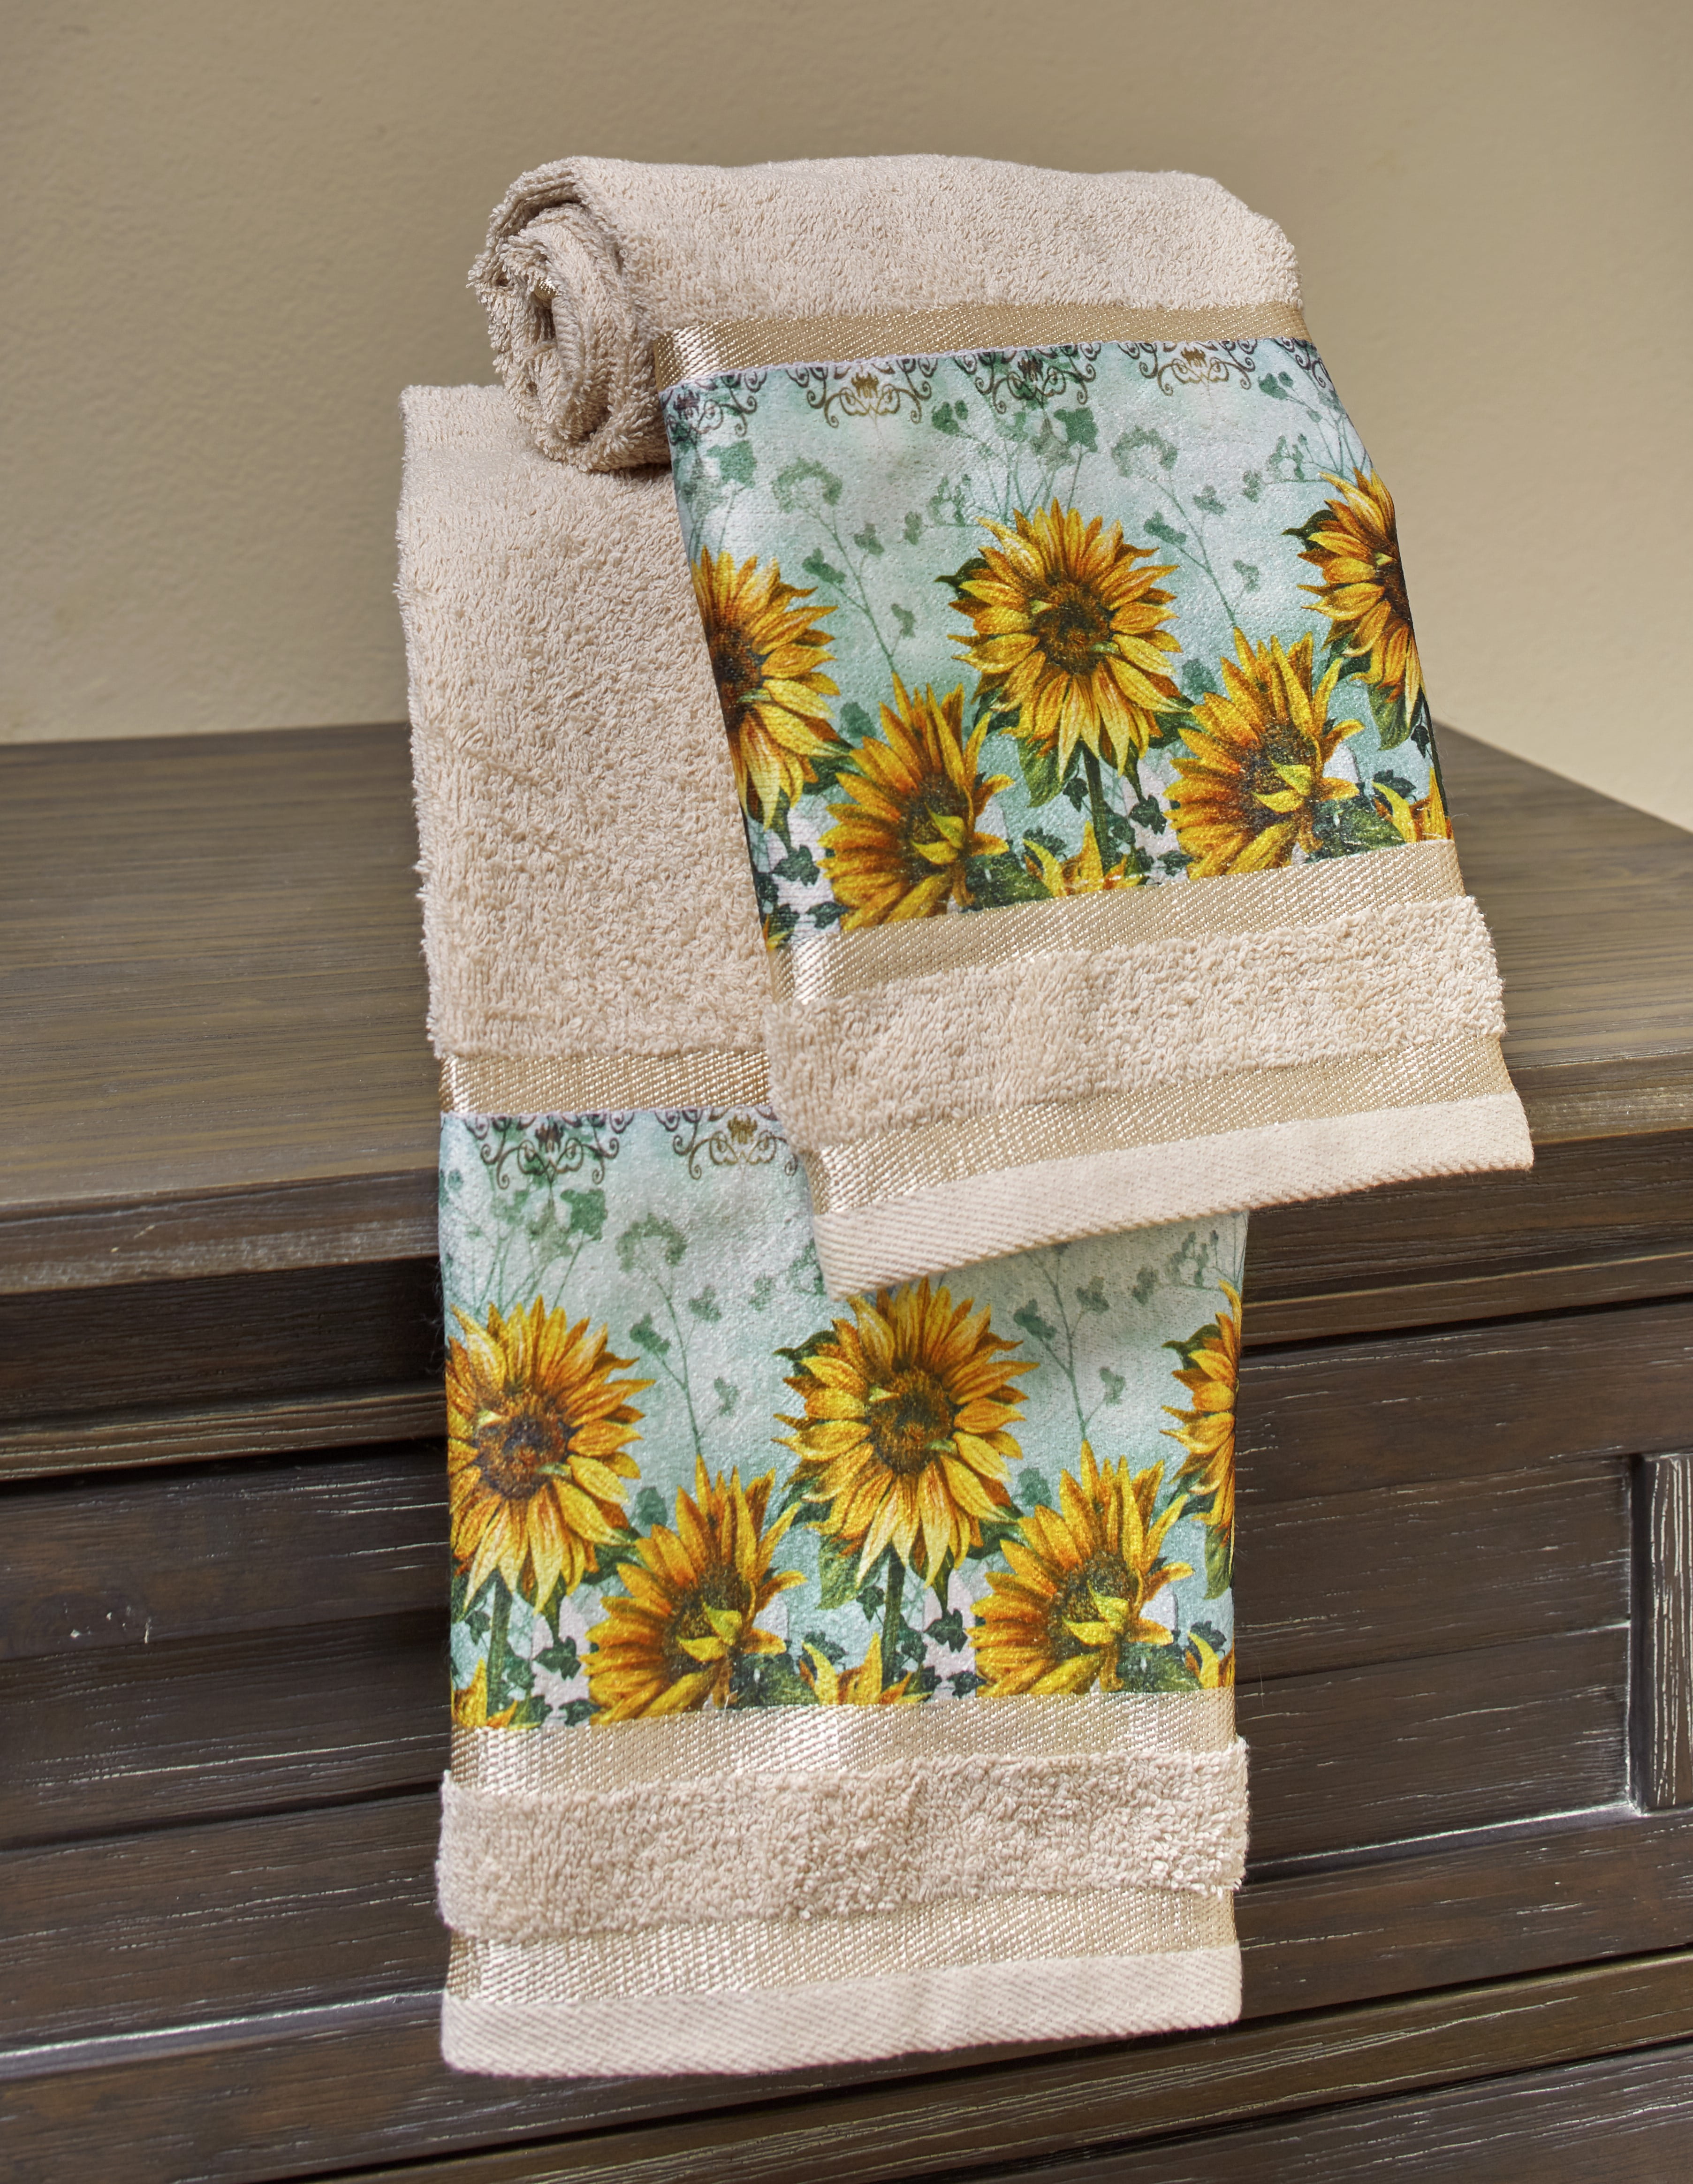 Details about   Hand made Sunflowers on red Towel Bathroom Hand and bath Towel  